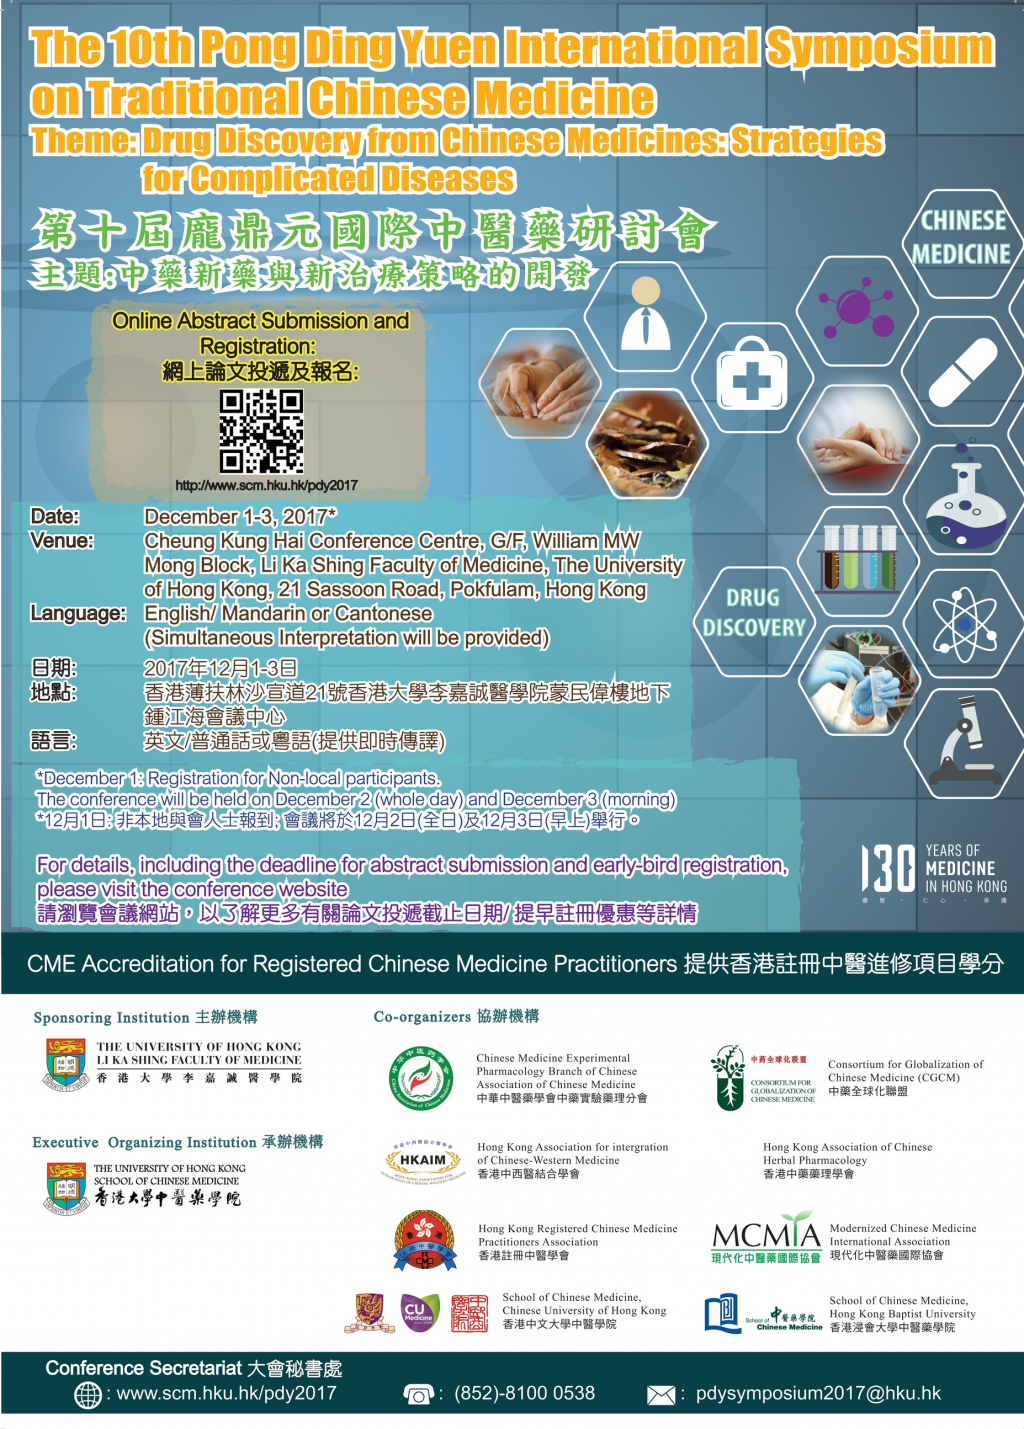 (30 Sep) Call for Papers and Registration - The 10th Pong Ding Yuen International Symposium on Traditional Chinese Medicine